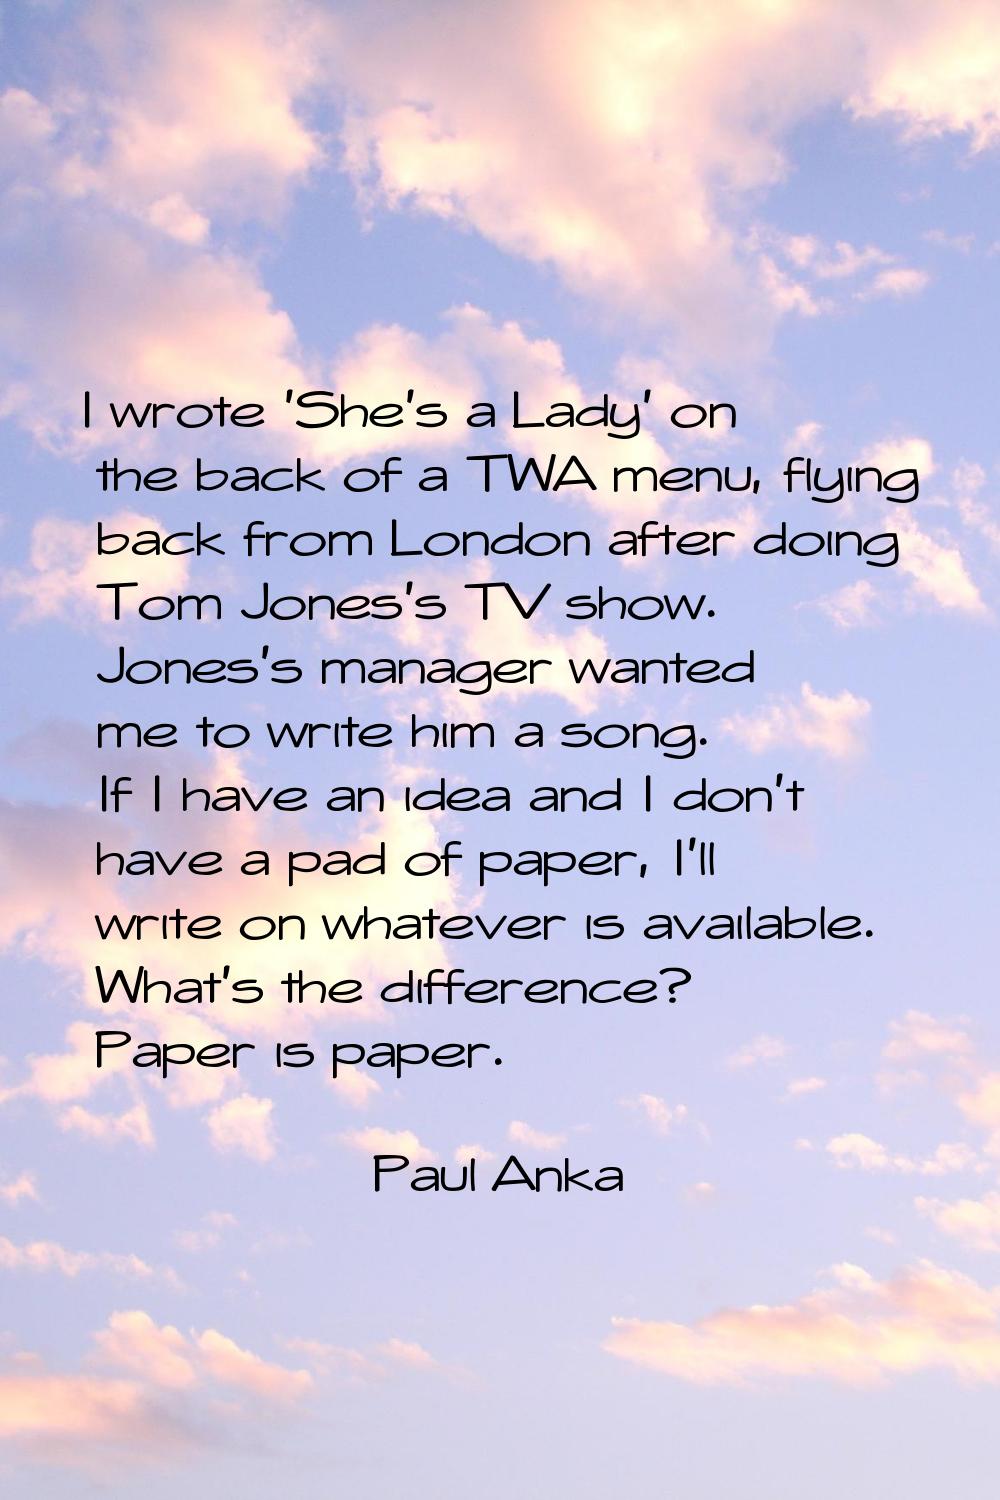 I wrote 'She's a Lady' on the back of a TWA menu, flying back from London after doing Tom Jones's T